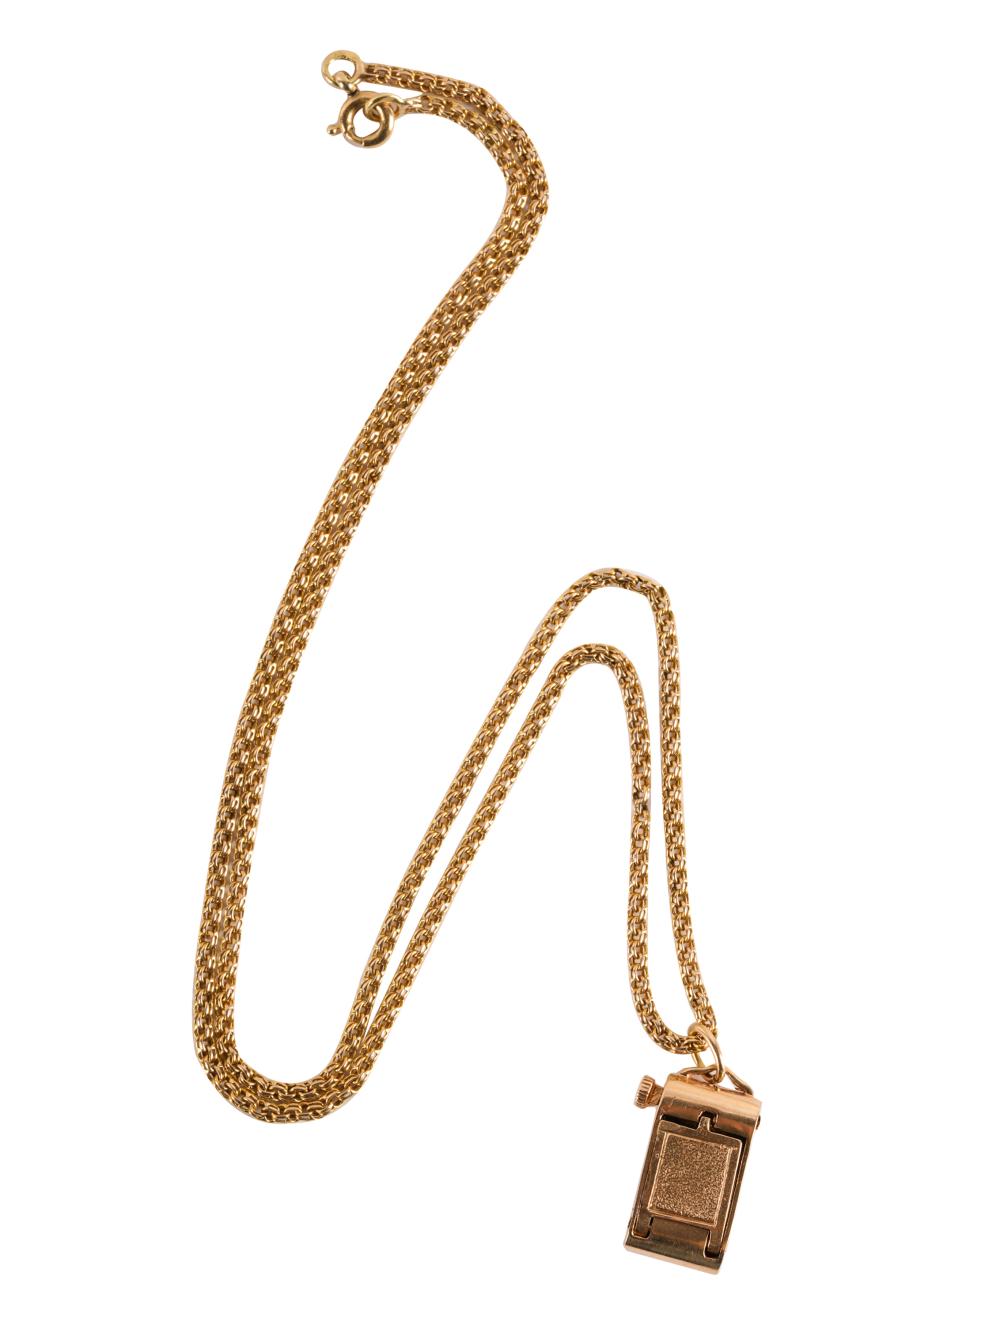 YELLOW GOLD CAMERA CHARM NECKLACEcomprising